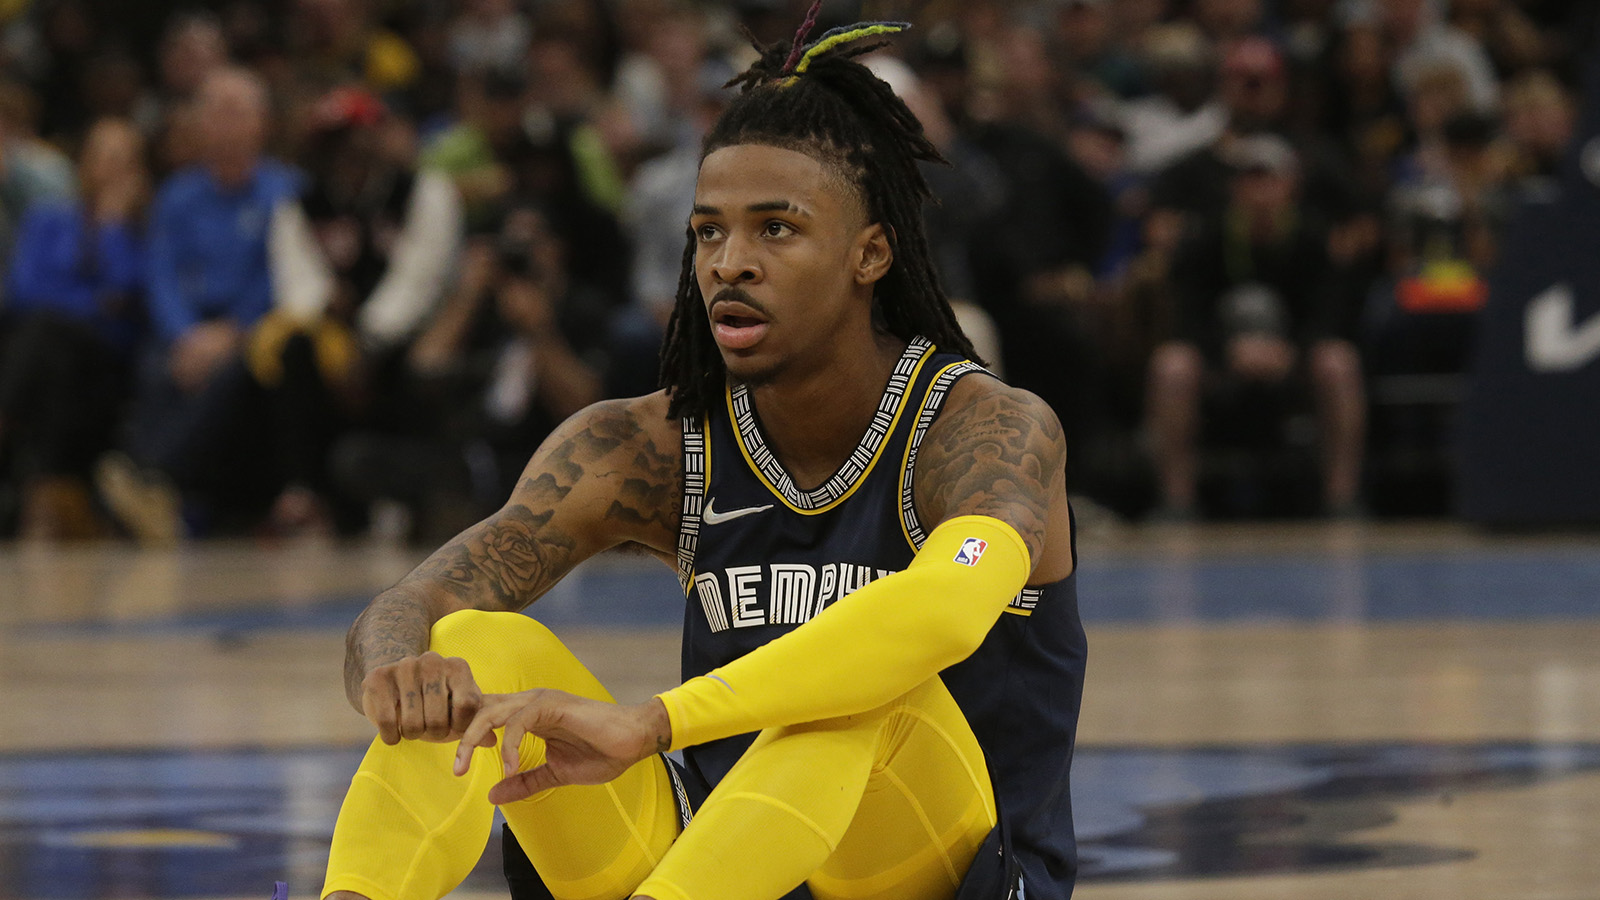 Ja Morant 2022 Memphis Grizzlies game worn jersey, est. $20-25 thousand, is  previewed before auction at Sotheby's in New York, NY, on February 1, 2023.  Sotheby's Zenith auctions feature game-worn sports artifacts